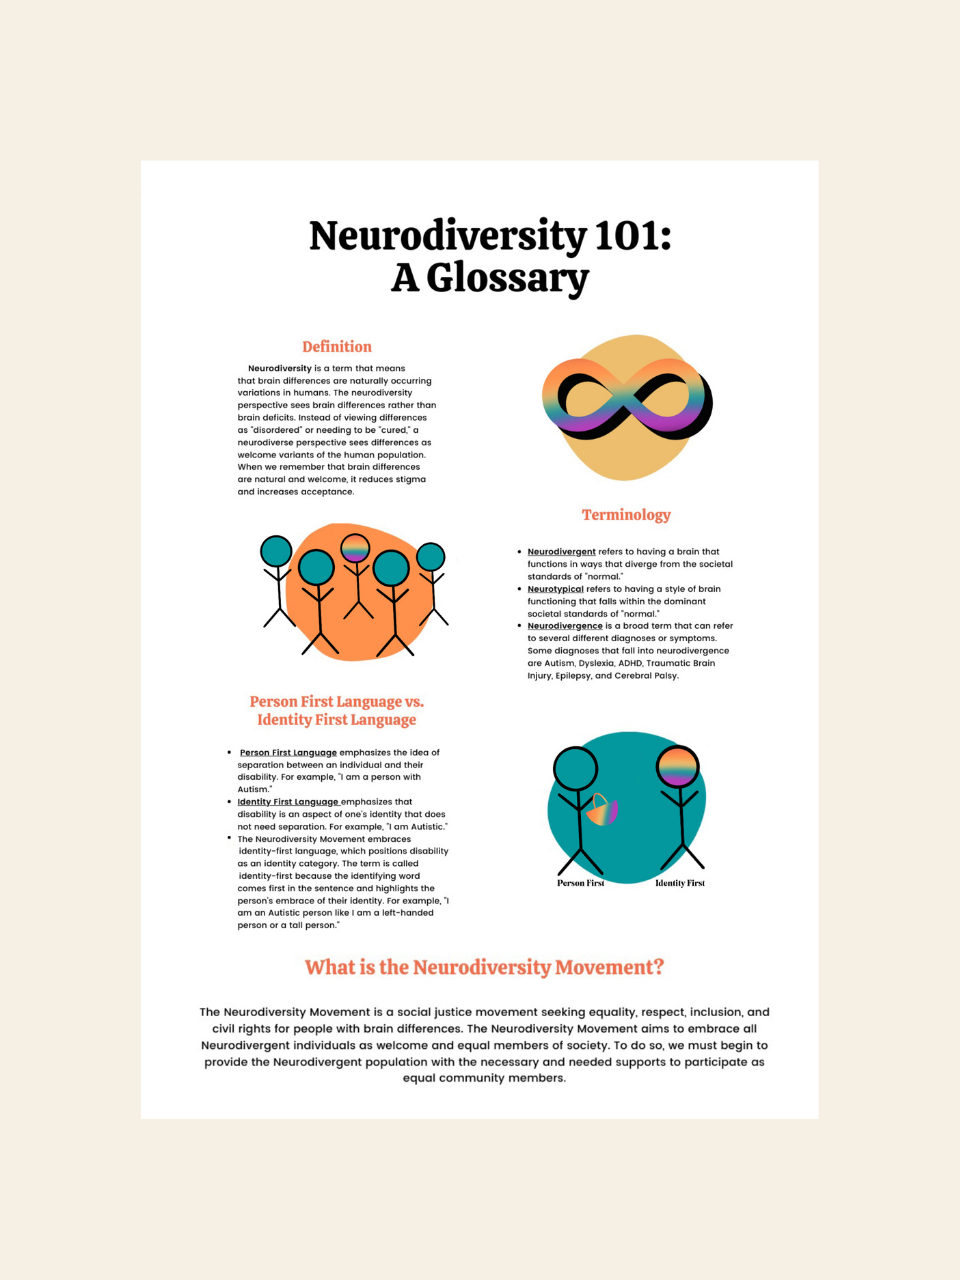 Neurodiversity 101: Basic Terms and Definitions